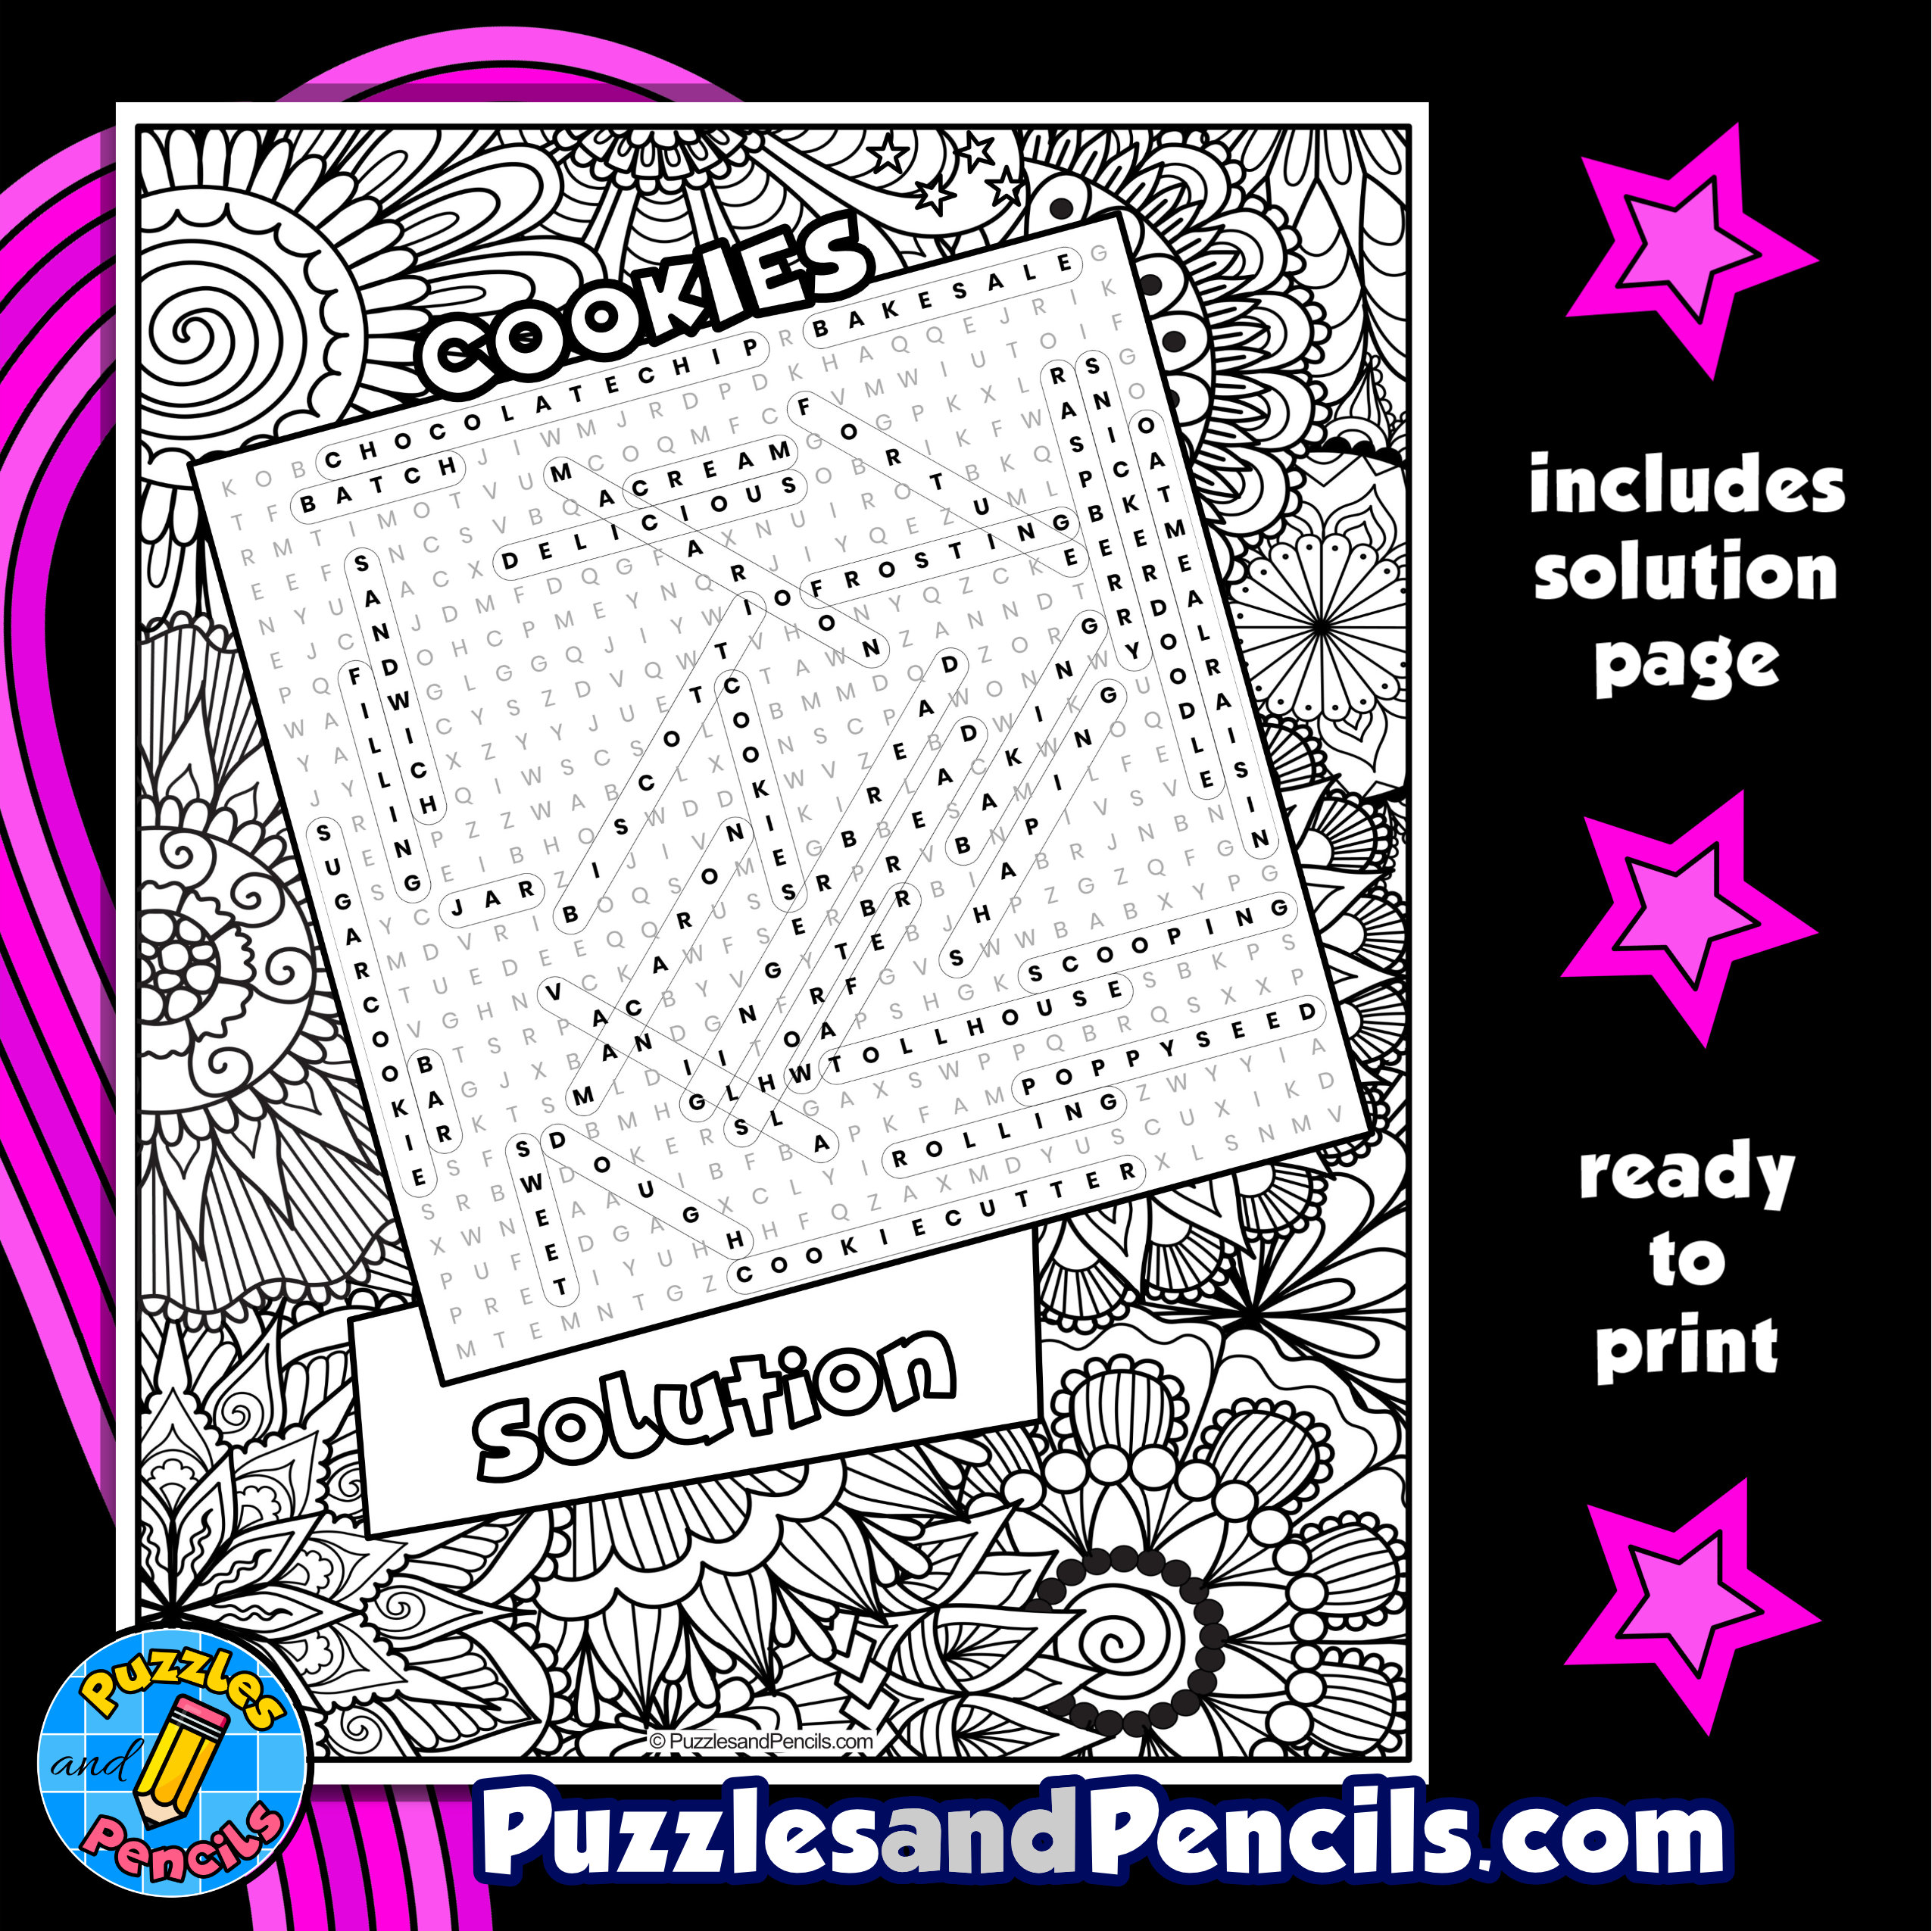 Cookies word search puzzle activity page with coloring made by teachers